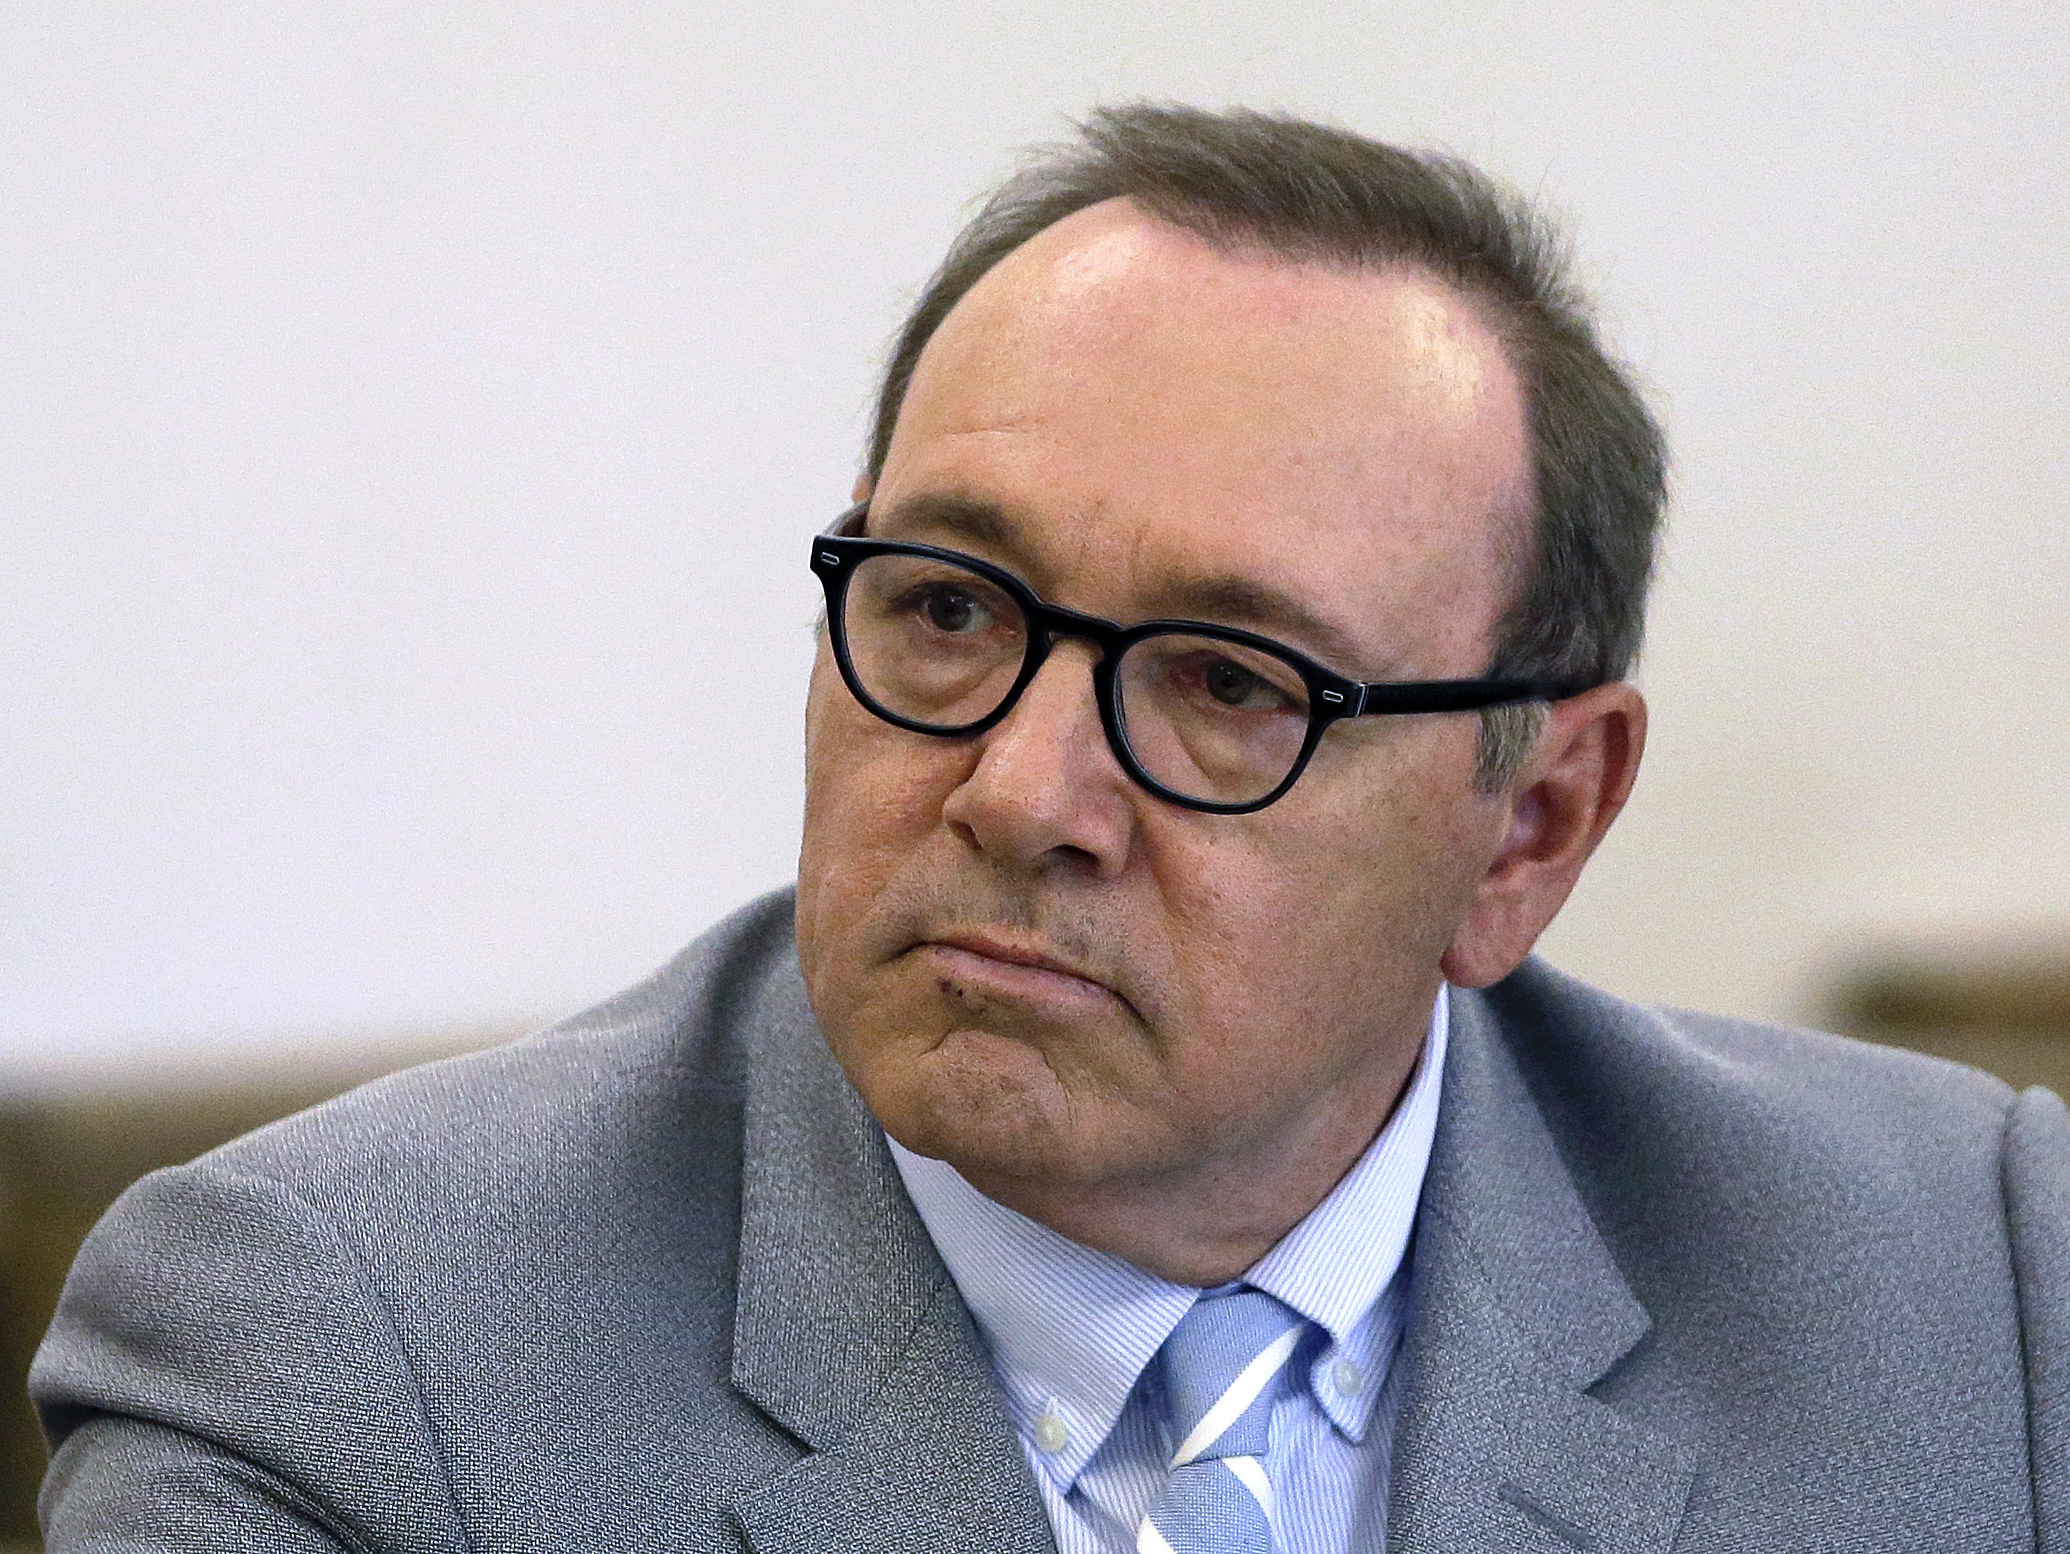 Actor Kevin Spacey attends a pretrial hearing on Monday, June 3, 2019, at district court in Nantucket, Mass. British police say actor Kevin Spacey is expected to appear in a court in London this week after he was charged with sexual offenses against three men. Spacey, 62, is accused of four counts of sexual assault and one count of causing a person to engage in penetrative sexual activity without consent. (AP Photo/Steven Senne)